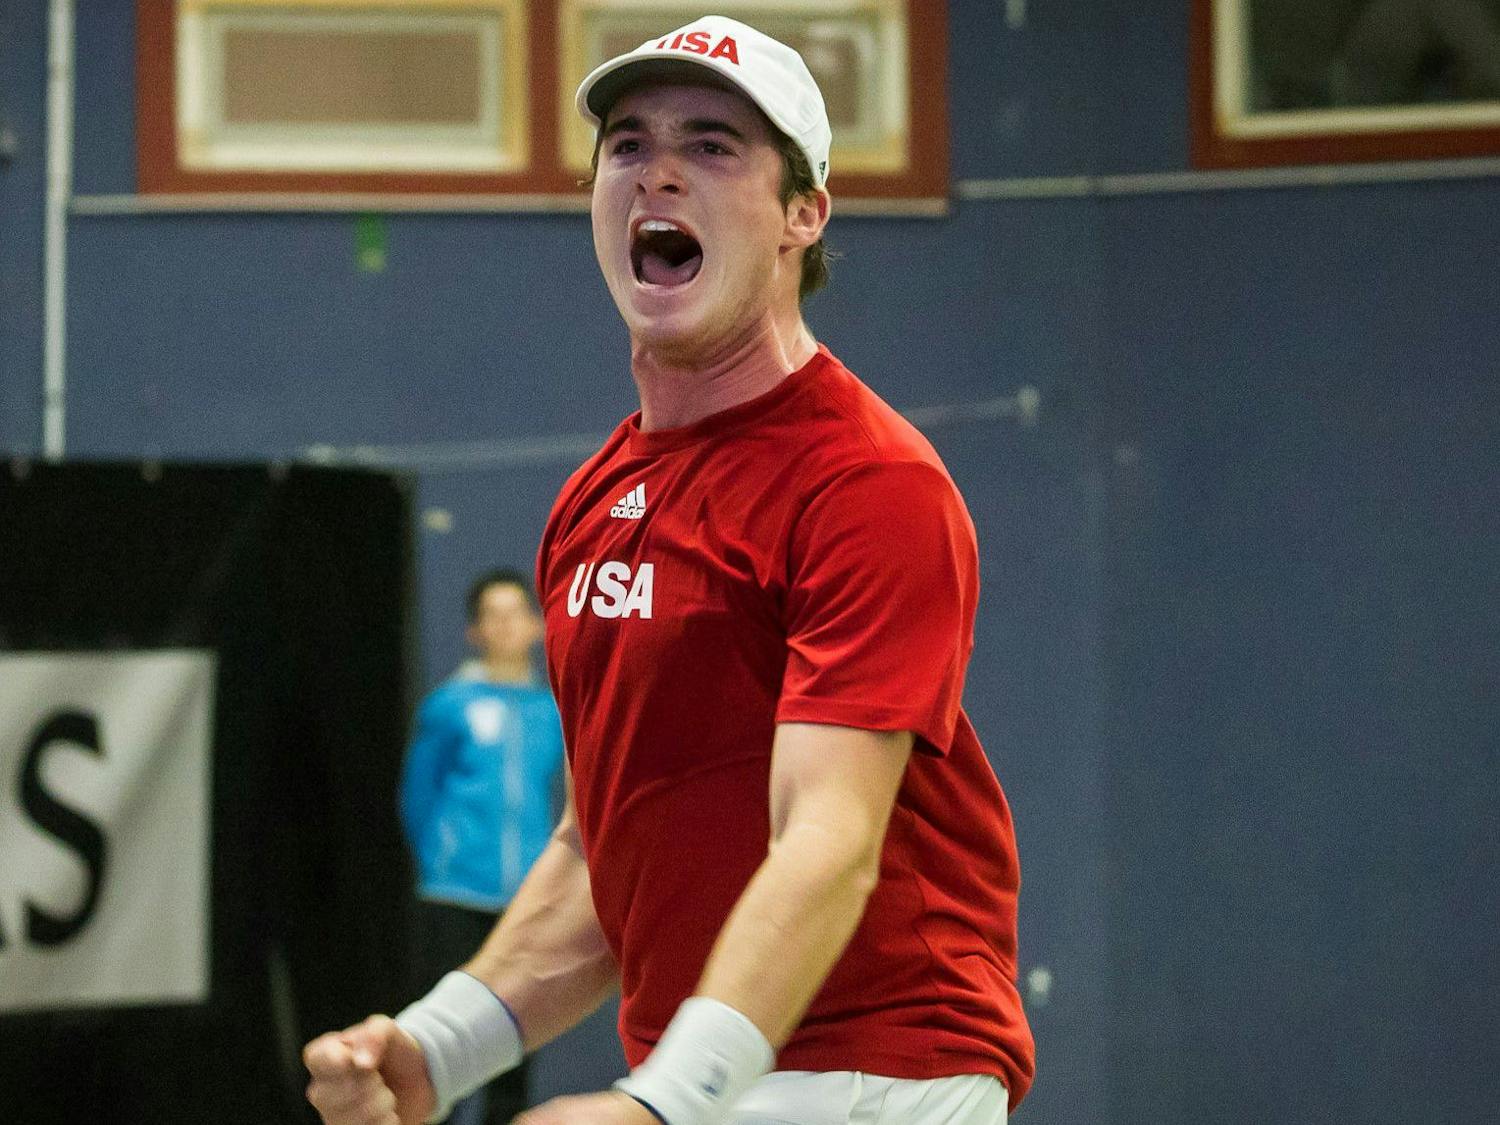 Oliver Crawford helped team USA to a victory at the&nbsp;Master’U Collegiate Tournament to culminate a successful fall season that saw him claim&nbsp;singles titles at the USA F28 Futures and the UVA Masters.